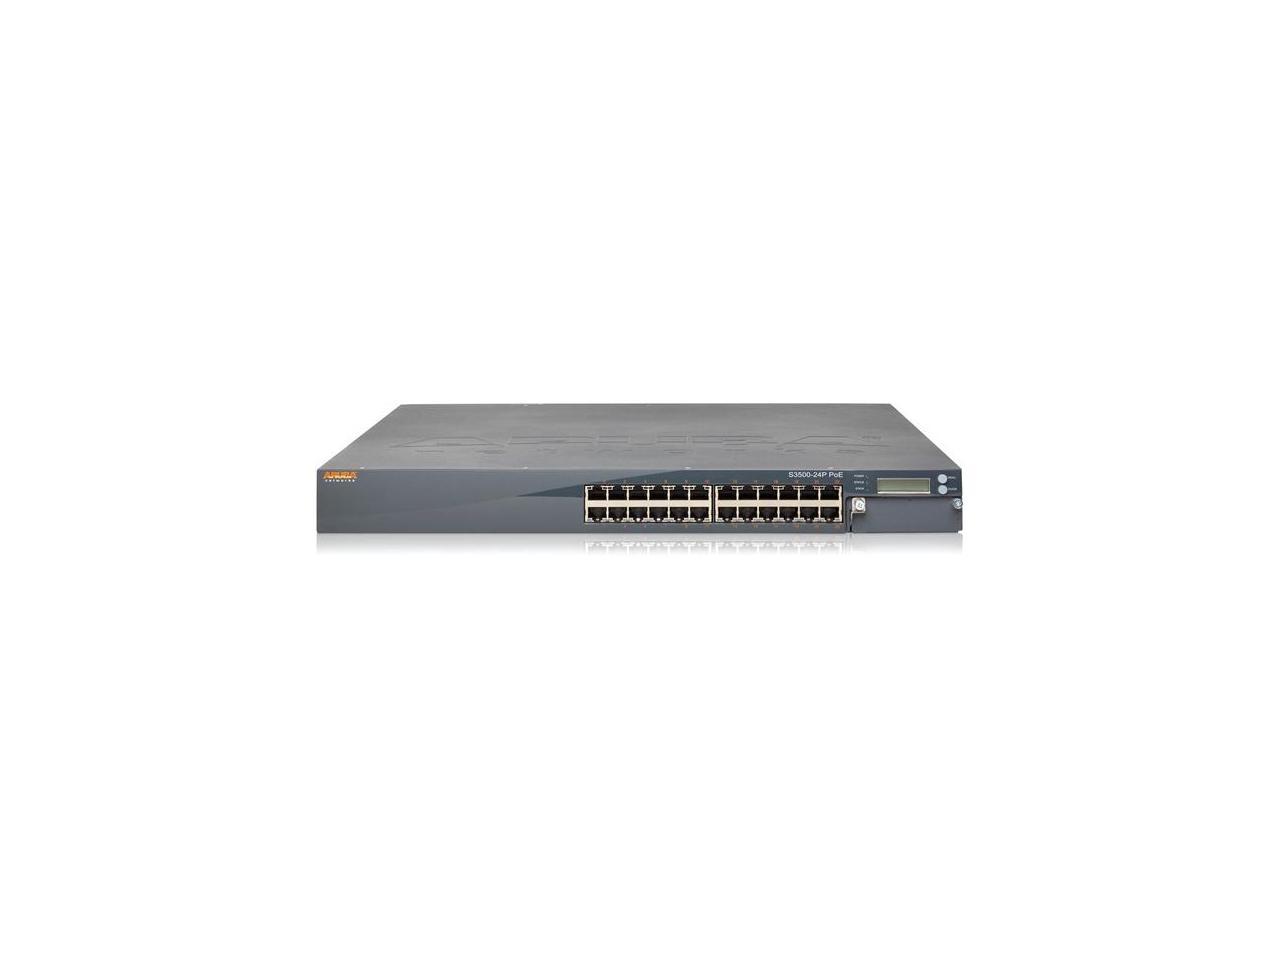 Aruba S3500-48PF 48-Port Mobility Access Switch with 48 10/100/1000BASE AMZ 